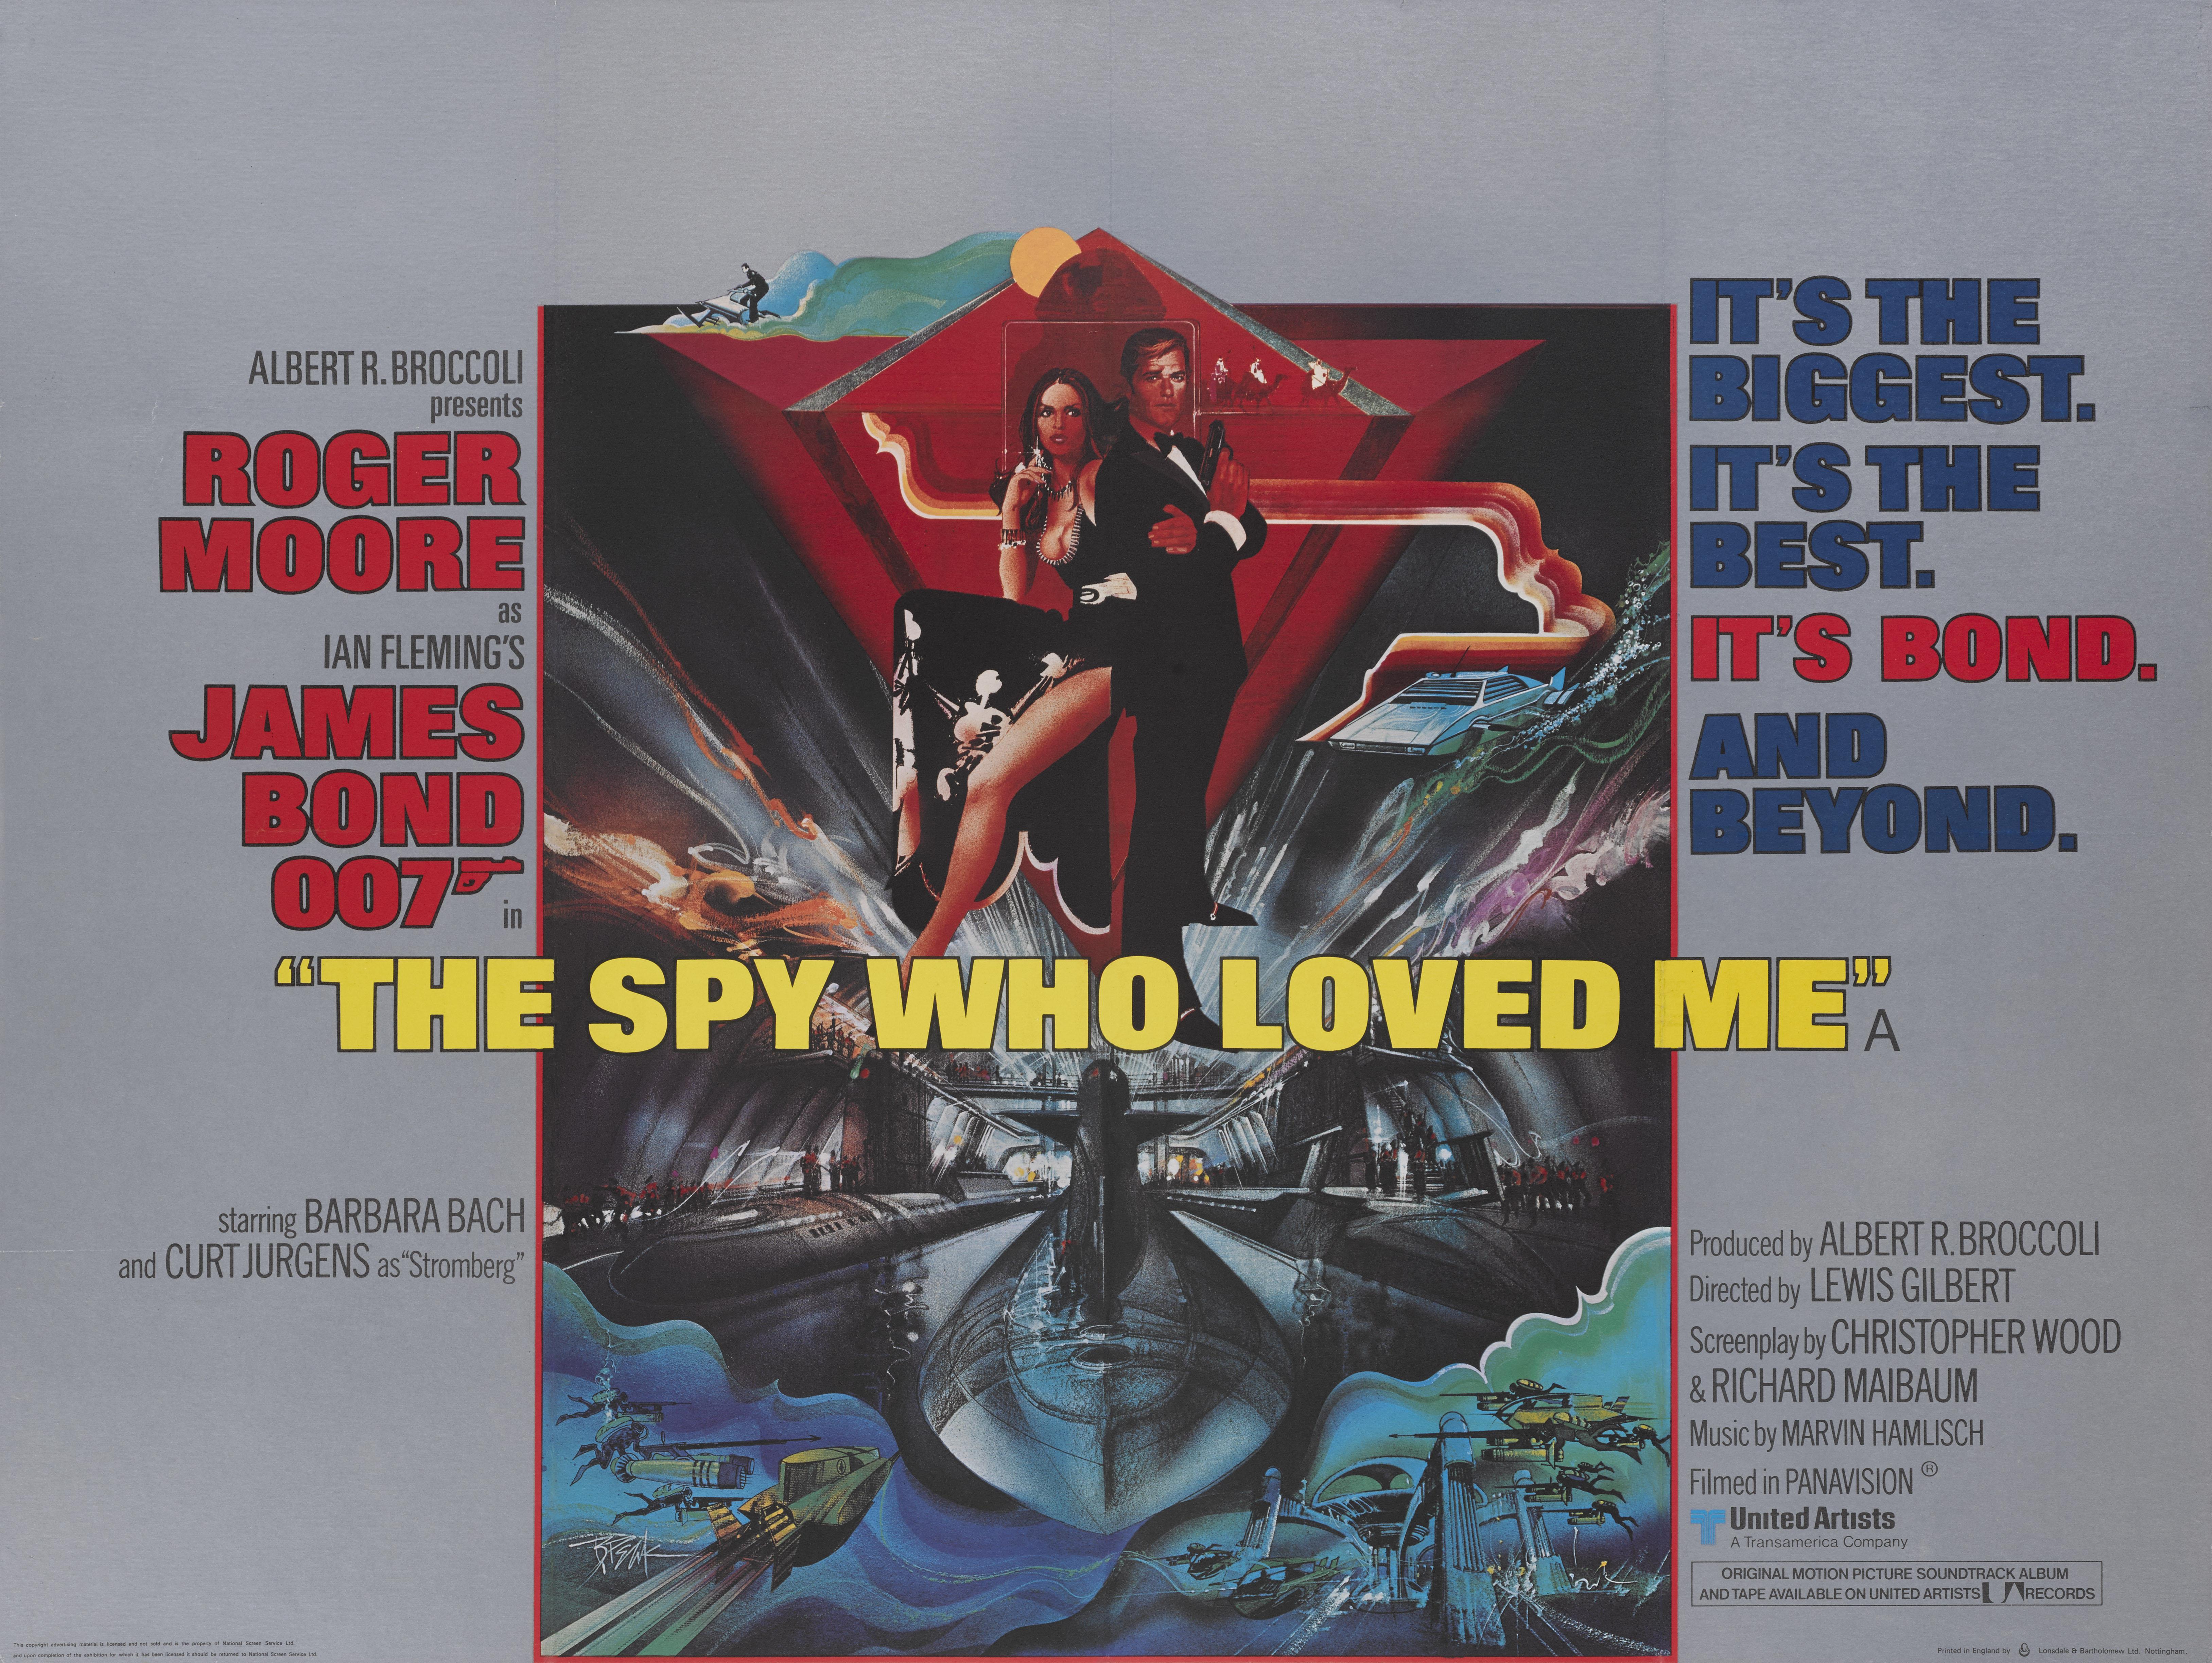 Original British film poster for the 1977 James Bond films The Spy Who Loved starring Roger Moore as 007. This poster is conservation linen backed and it would be shipped in a strong tube and sent by Fed-Ex